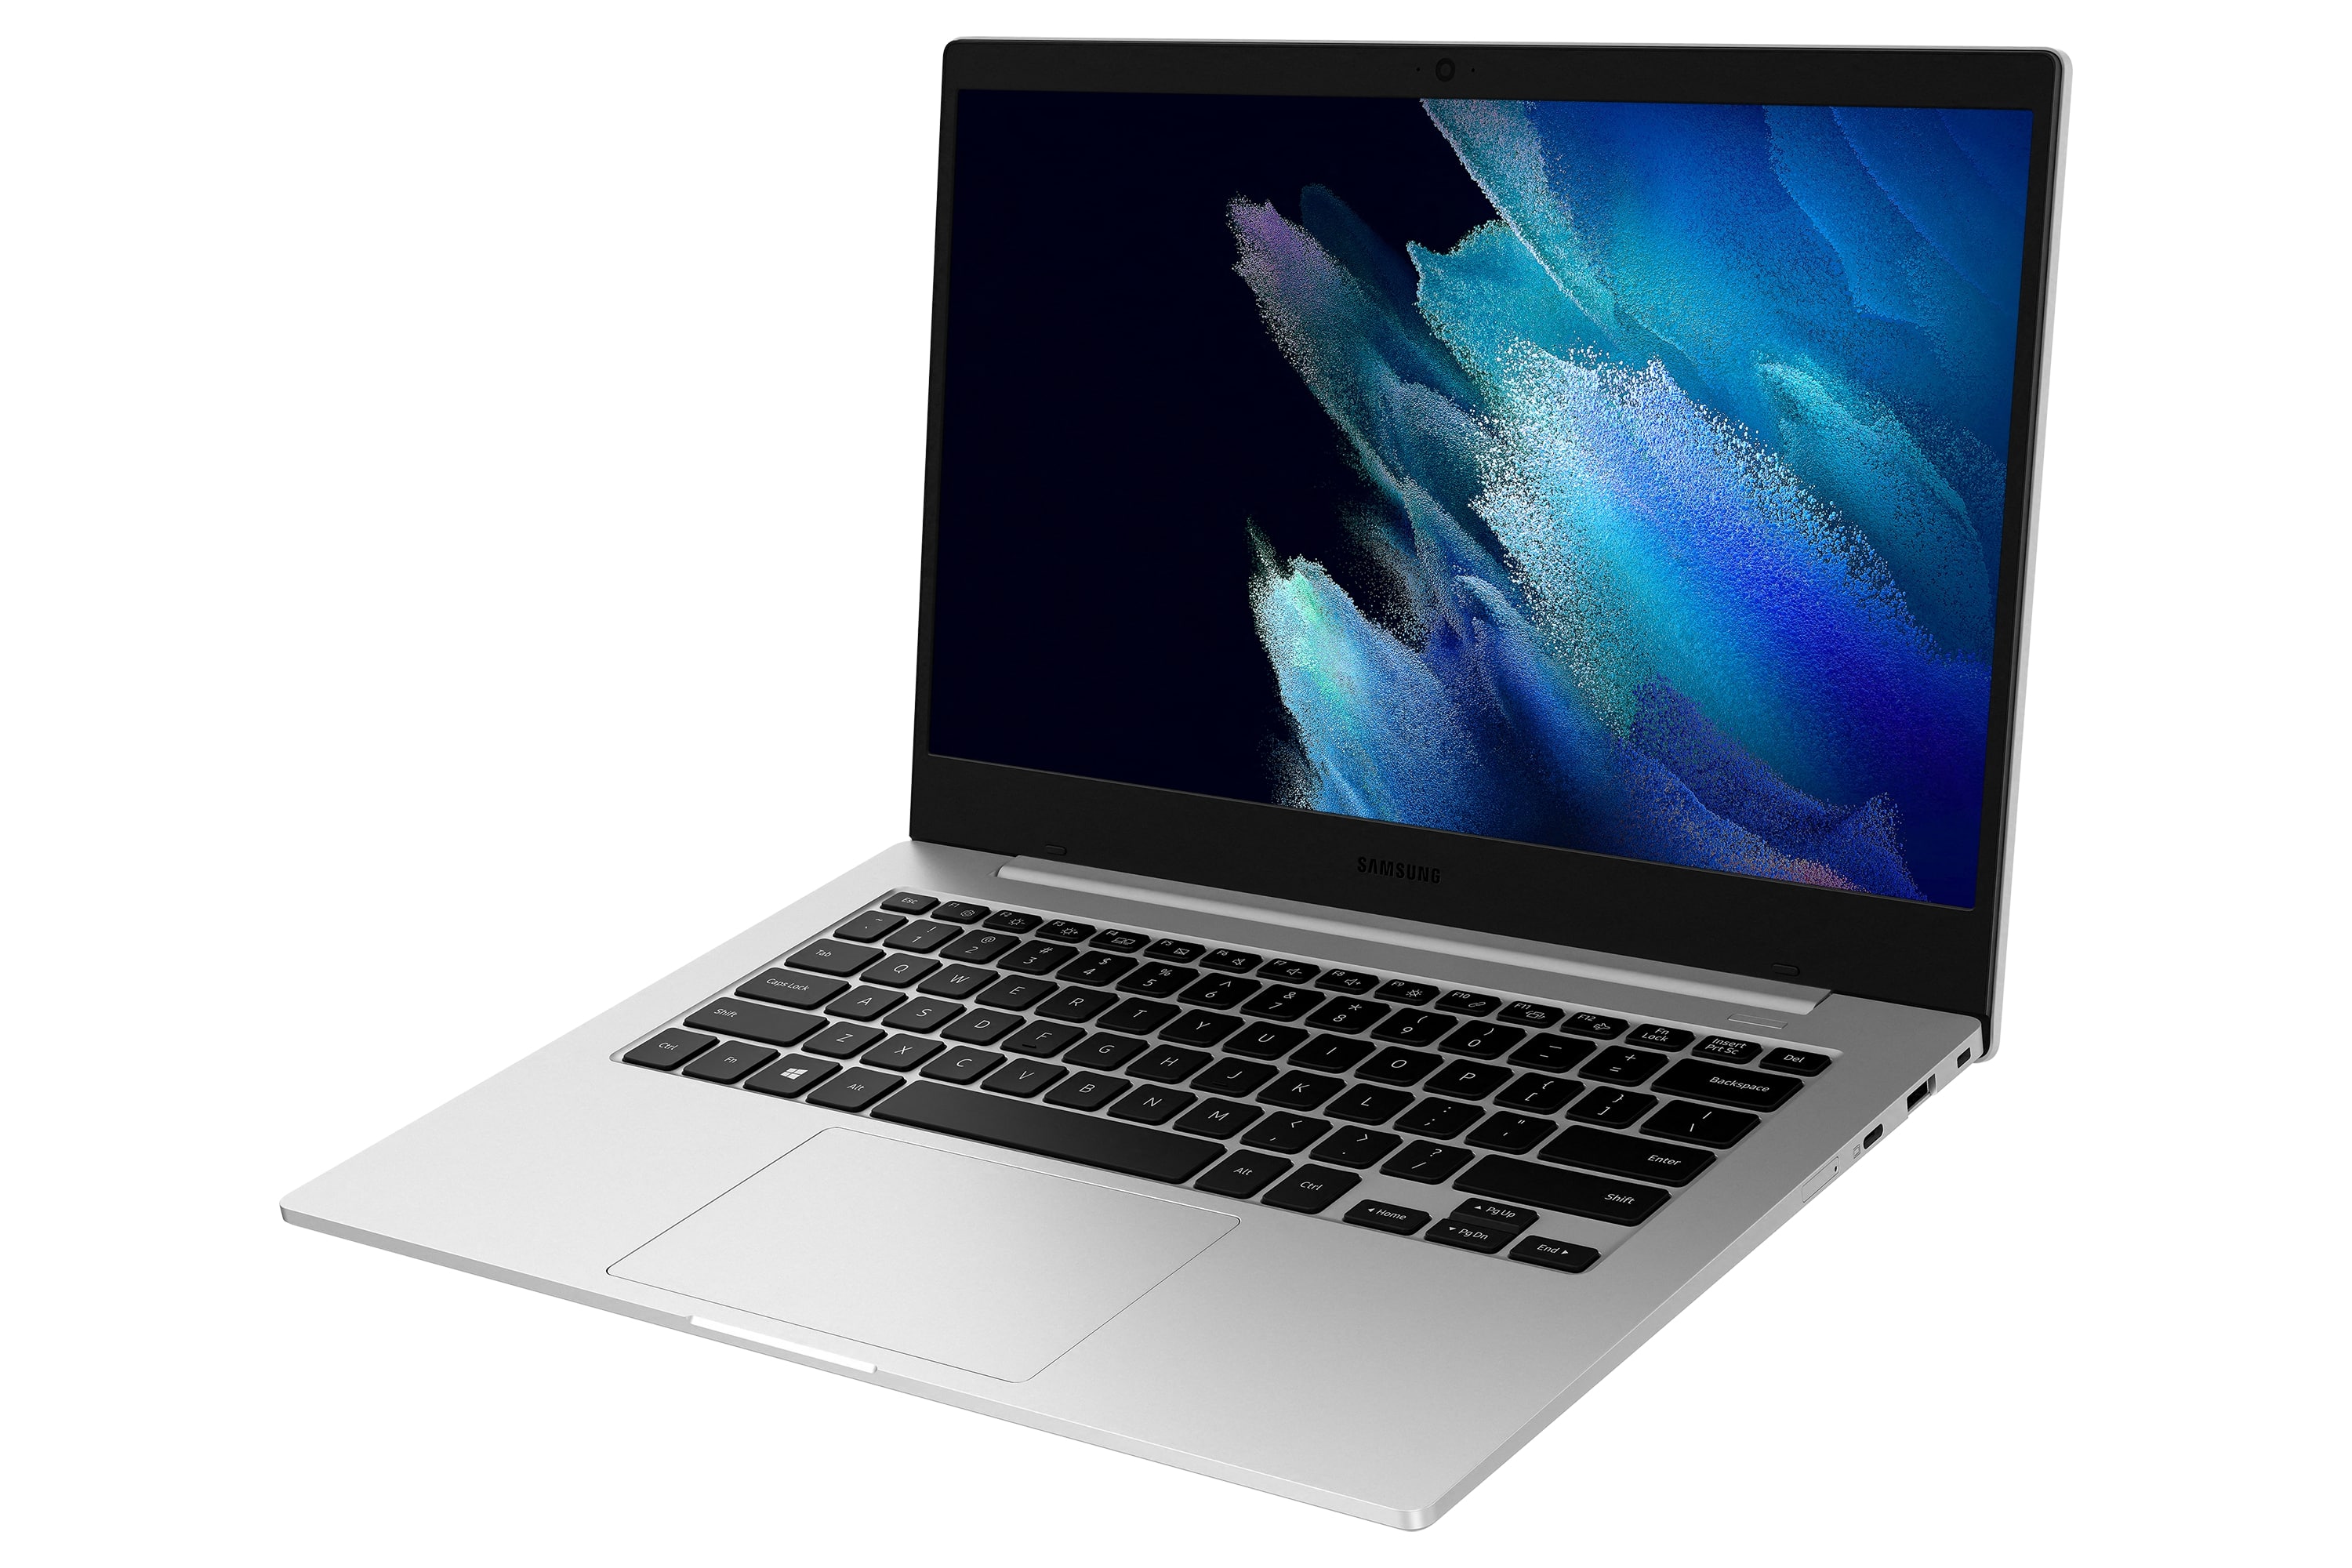 samsung launches arm galaxy book go for 350 us keyboard 3